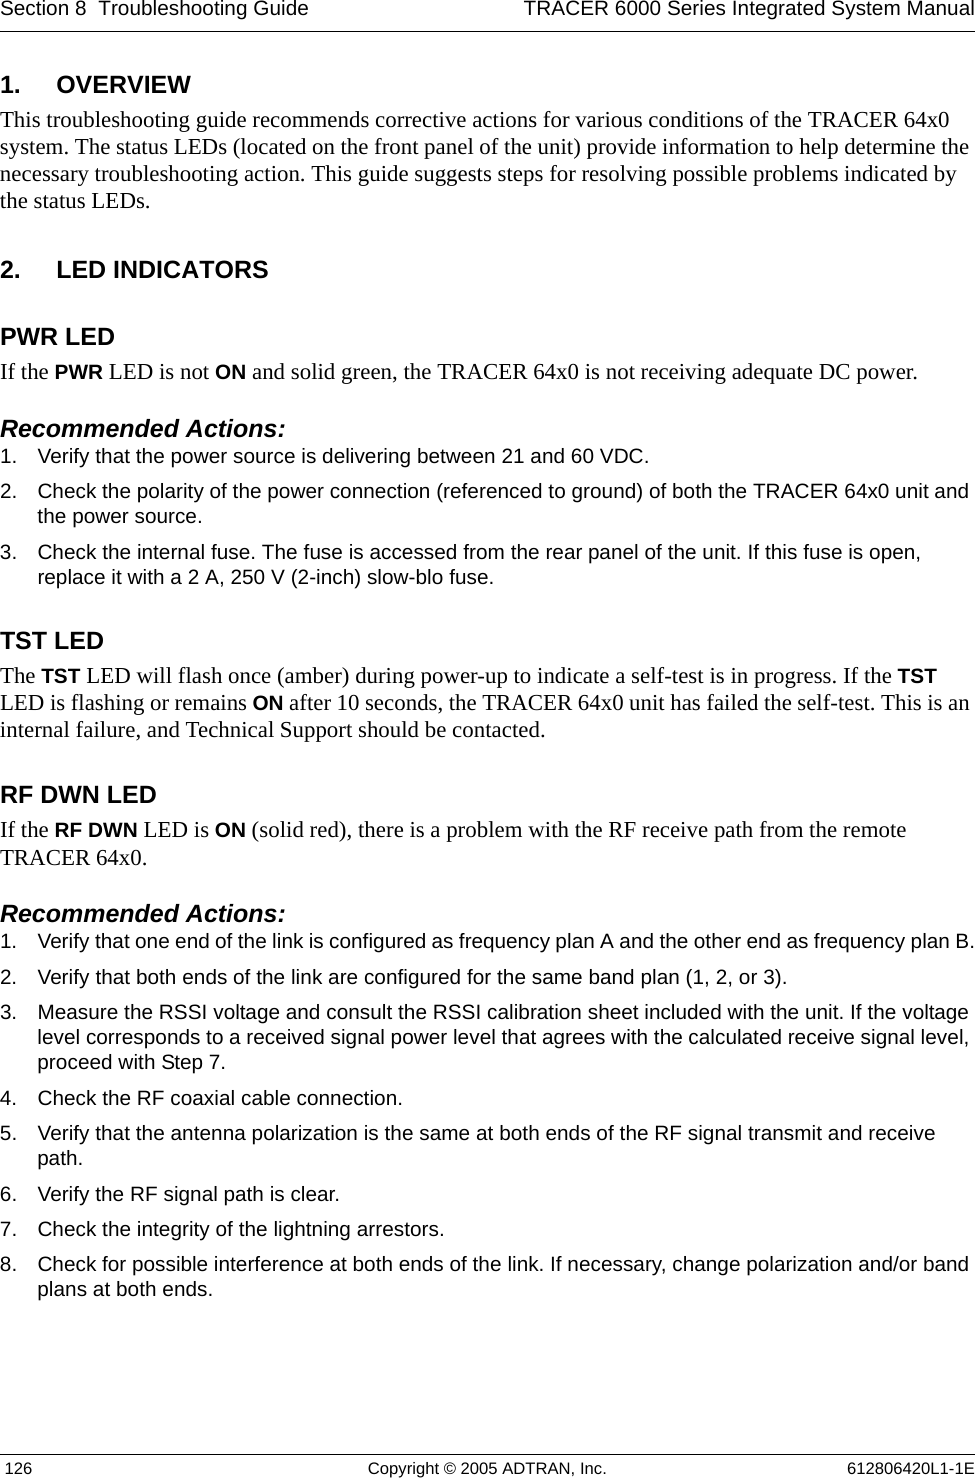 Section 8  Troubleshooting Guide TRACER 6000 Series Integrated System Manual 126 Copyright © 2005 ADTRAN, Inc. 612806420L1-1E1. OVERVIEWThis troubleshooting guide recommends corrective actions for various conditions of the TRACER 64x0 system. The status LEDs (located on the front panel of the unit) provide information to help determine the necessary troubleshooting action. This guide suggests steps for resolving possible problems indicated by the status LEDs.2. LED INDICATORSPWR LEDIf the PWR LED is not ON and solid green, the TRACER 64x0 is not receiving adequate DC power. Recommended Actions:1. Verify that the power source is delivering between 21 and 60 VDC.2. Check the polarity of the power connection (referenced to ground) of both the TRACER 64x0 unit and the power source.3. Check the internal fuse. The fuse is accessed from the rear panel of the unit. If this fuse is open, replace it with a 2 A, 250 V (2-inch) slow-blo fuse.TST LEDThe TST LED will flash once (amber) during power-up to indicate a self-test is in progress. If the TST LED is flashing or remains ON after 10 seconds, the TRACER 64x0 unit has failed the self-test. This is an internal failure, and Technical Support should be contacted.RF DWN LEDIf the RF DWN LED is ON (solid red), there is a problem with the RF receive path from the remote TRACER 64x0.Recommended Actions:1. Verify that one end of the link is configured as frequency plan A and the other end as frequency plan B.2. Verify that both ends of the link are configured for the same band plan (1, 2, or 3).3. Measure the RSSI voltage and consult the RSSI calibration sheet included with the unit. If the voltage level corresponds to a received signal power level that agrees with the calculated receive signal level, proceed with Step 7.4. Check the RF coaxial cable connection.5. Verify that the antenna polarization is the same at both ends of the RF signal transmit and receive path.6. Verify the RF signal path is clear.7. Check the integrity of the lightning arrestors.8. Check for possible interference at both ends of the link. If necessary, change polarization and/or band plans at both ends.